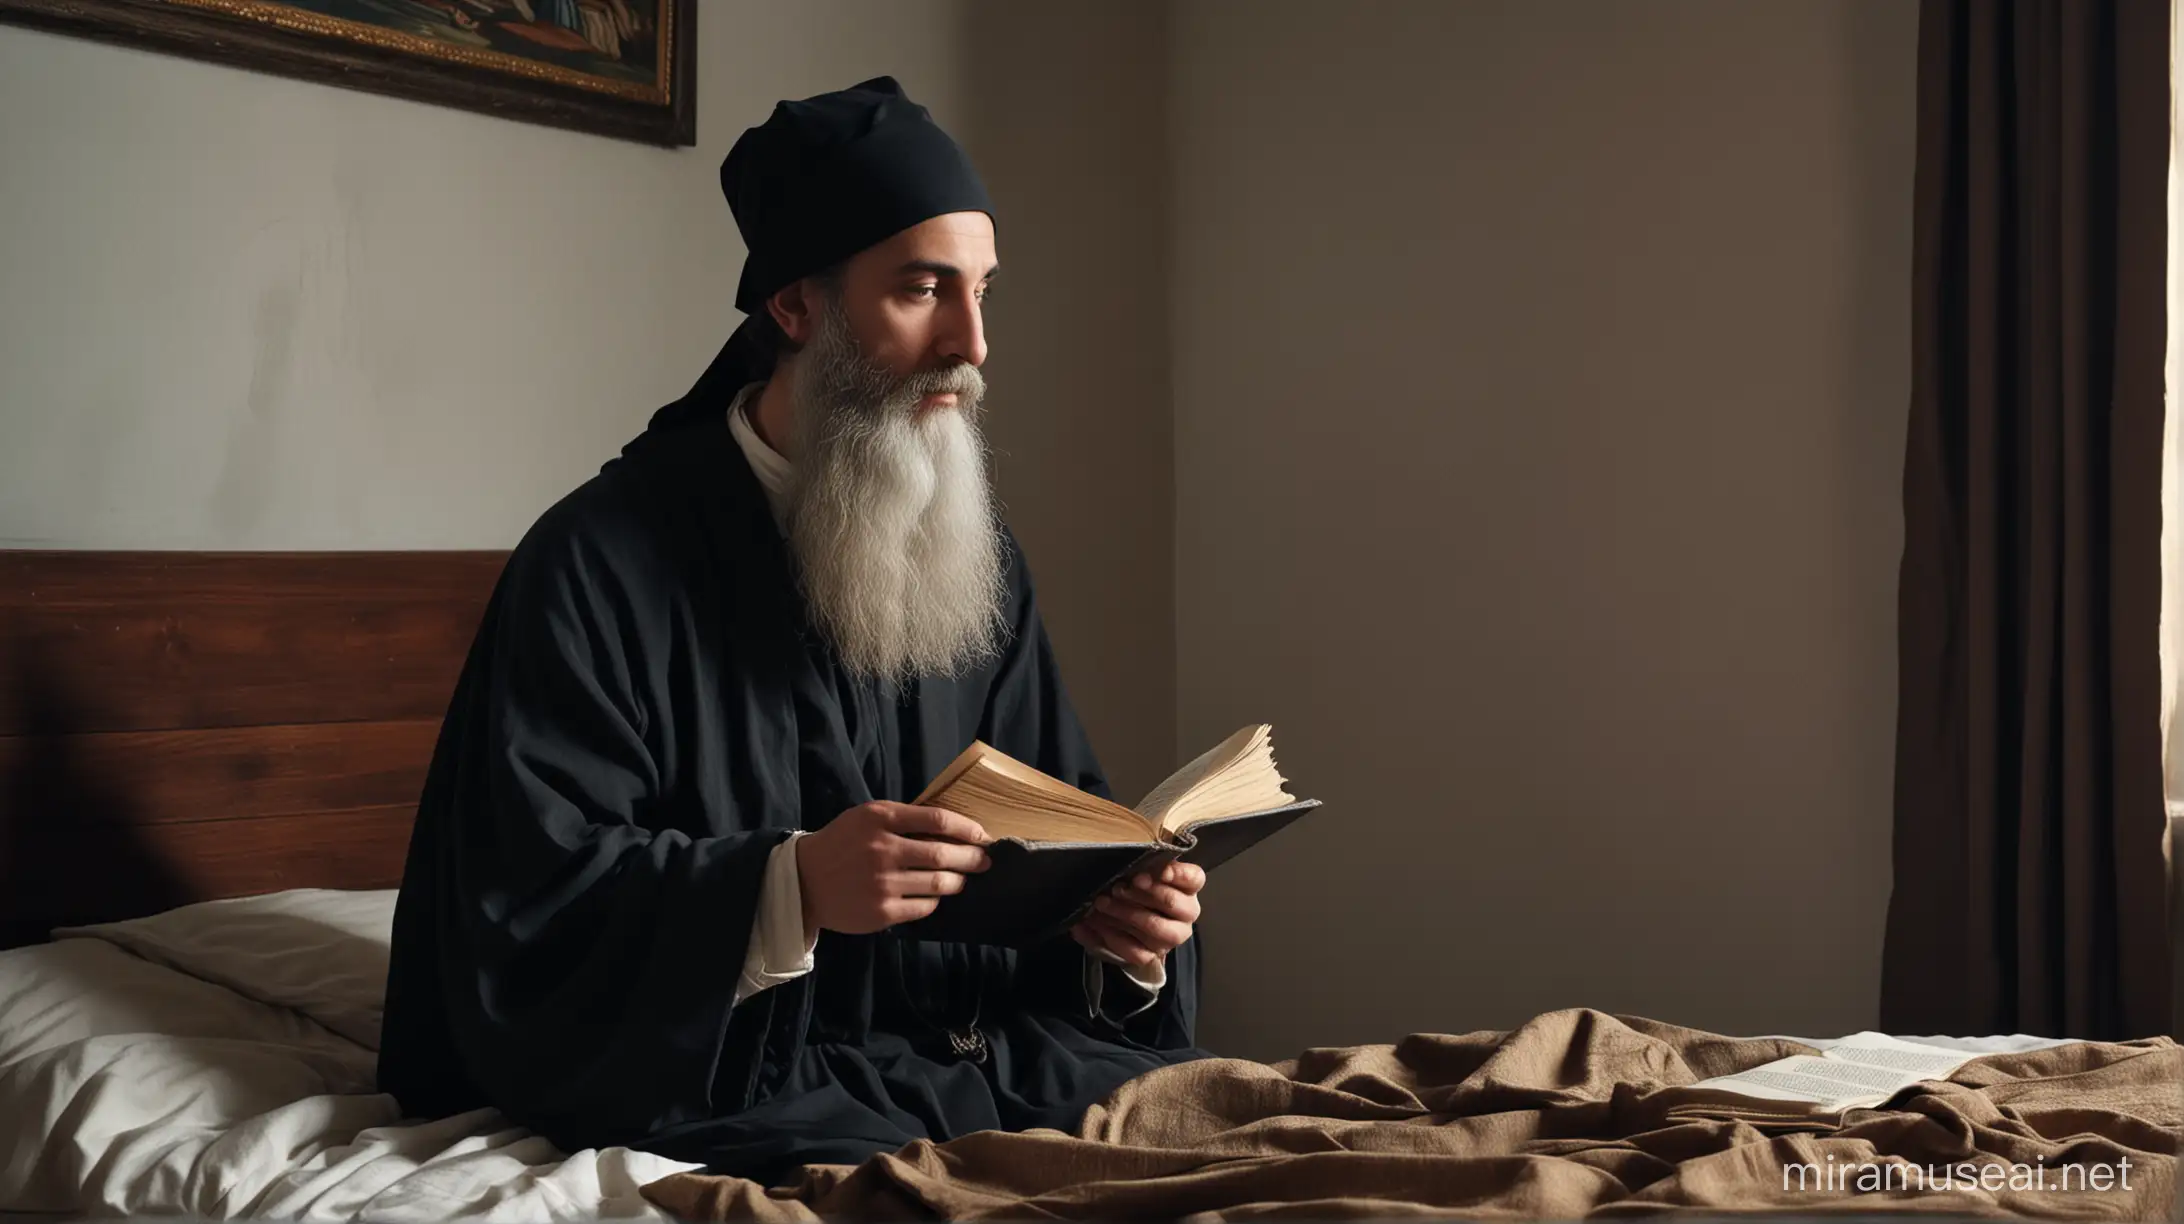 Saint Cosmas of Aetolia, young man with long  beard of short stature, the clothing is black and similar to that of a Greek Orthodox monk, 18th century, Greece, Saint Cosmas is reading a book in his beedroom of Athos monastery, profile, historical hyperrealistic cinematography